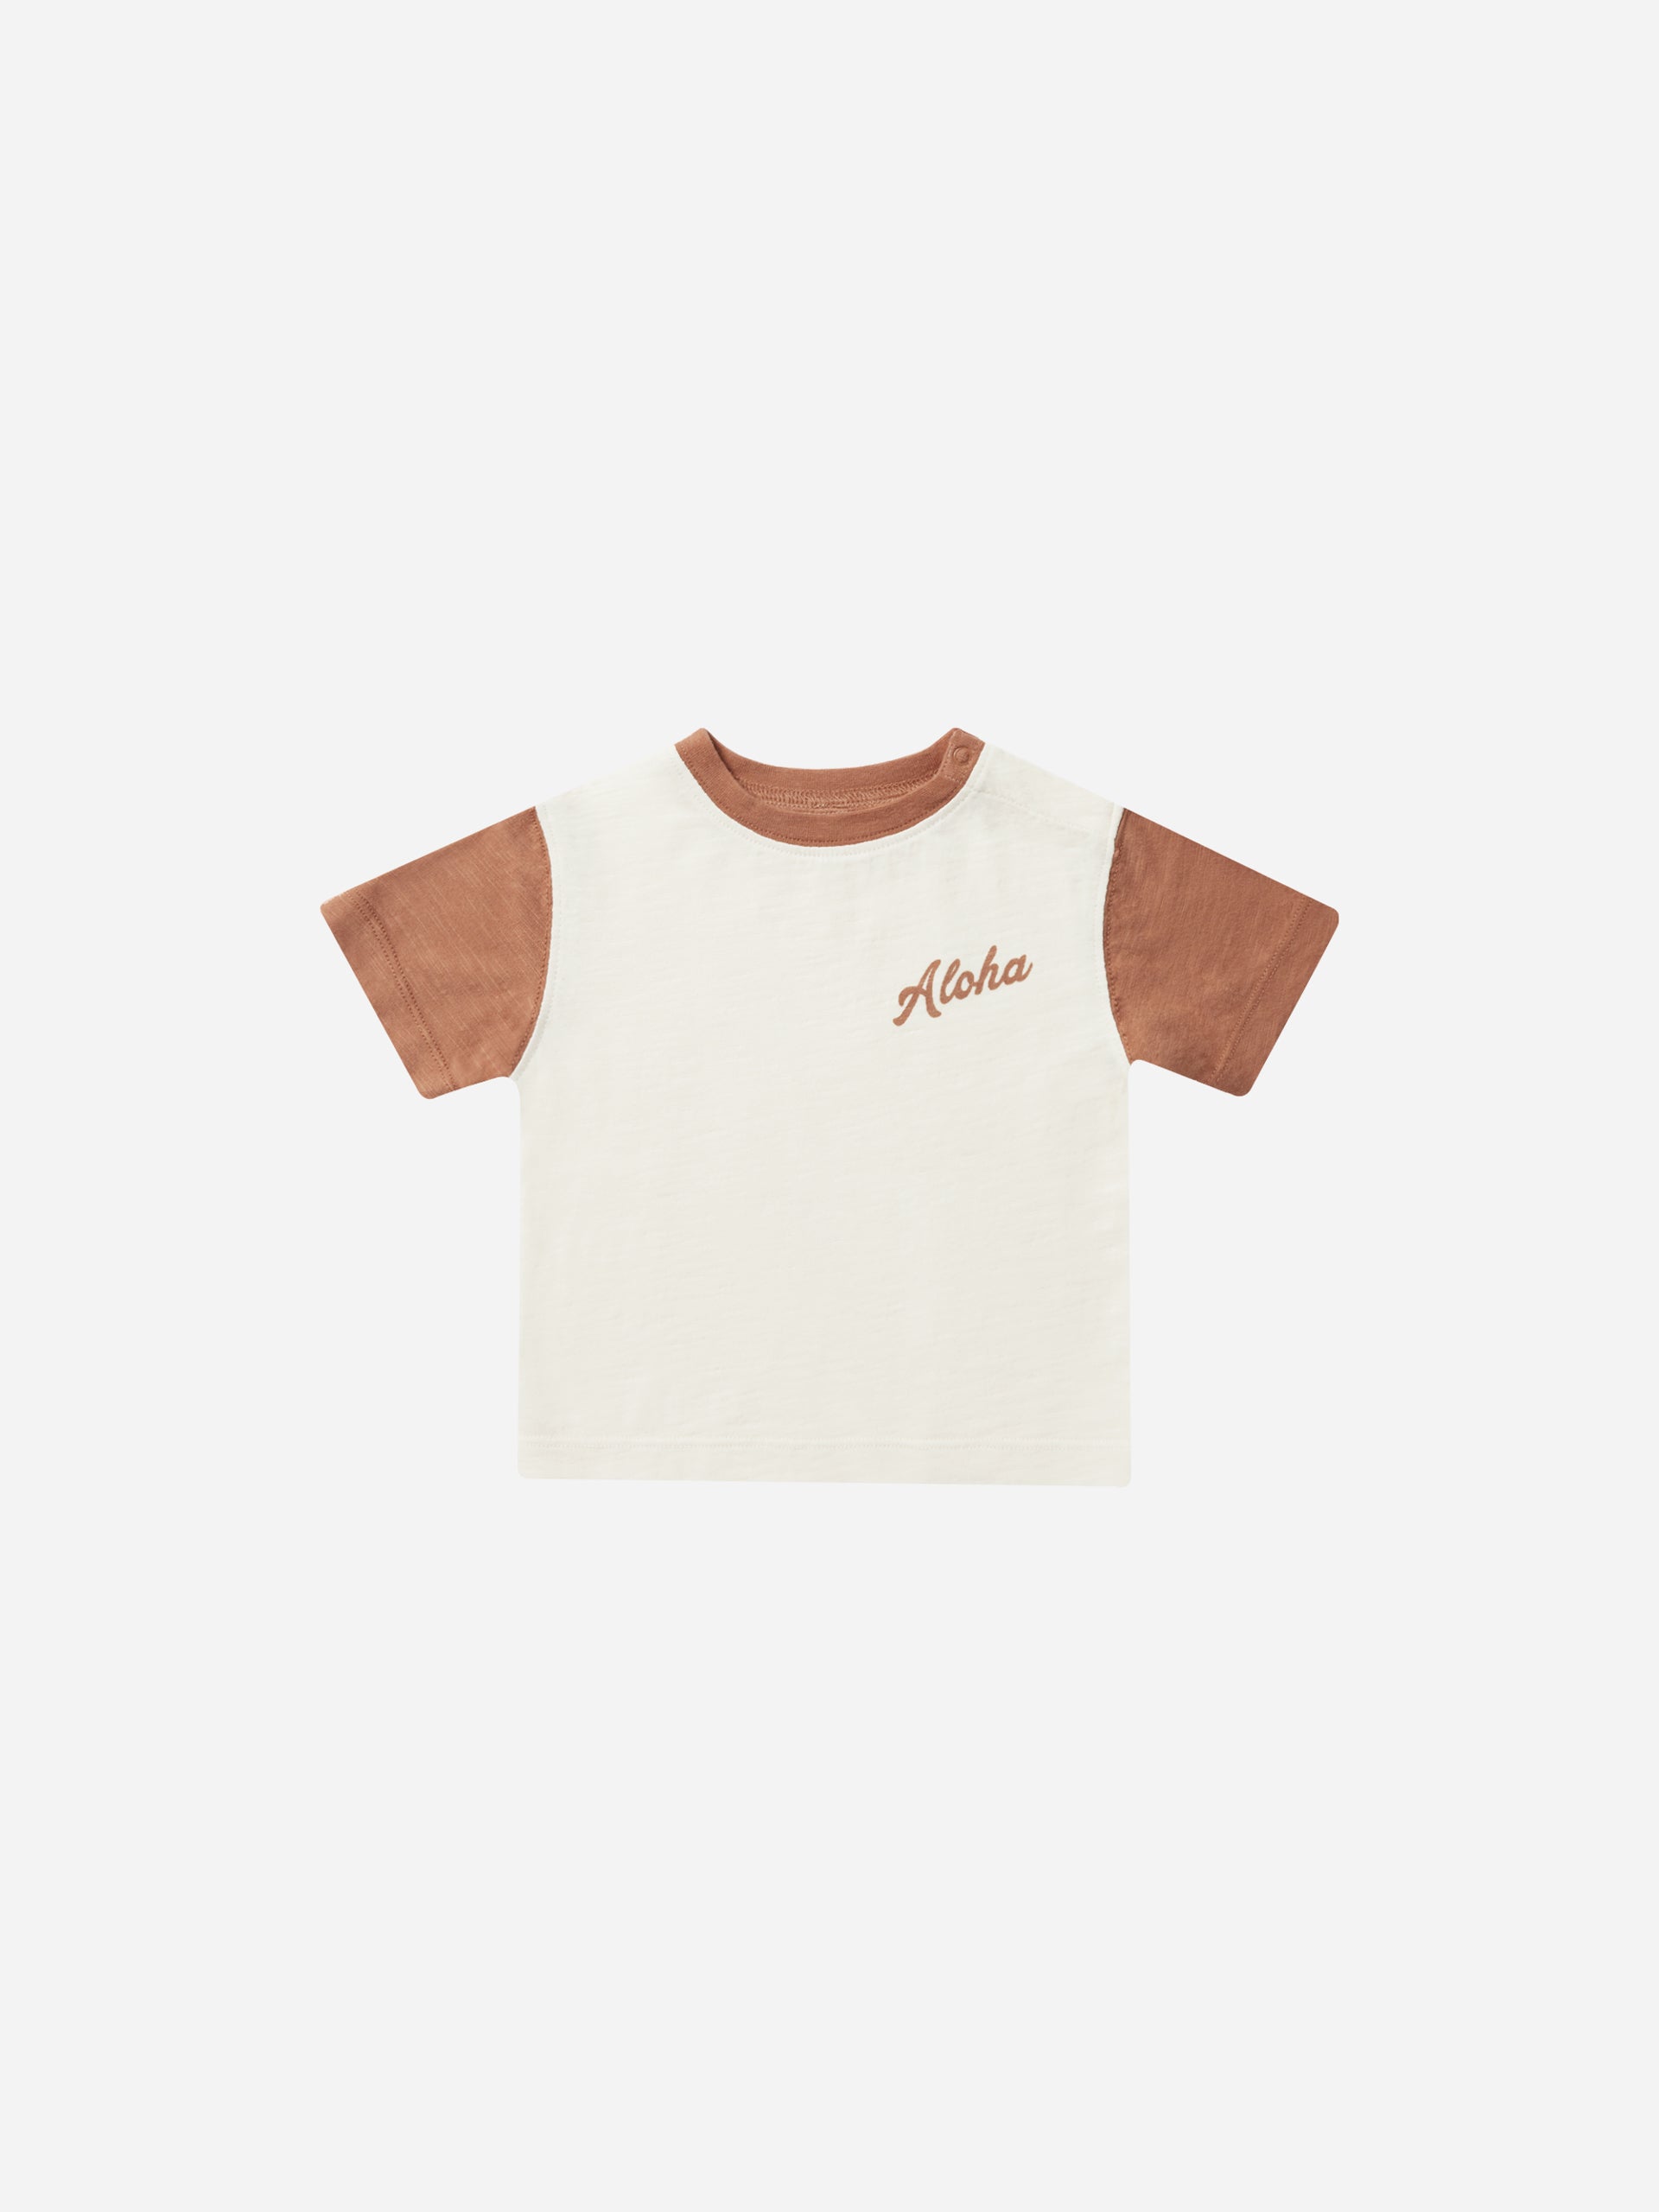 Contrast Short Sleeve Tee || Aloha - Rylee + Cru | Kids Clothes | Trendy Baby Clothes | Modern Infant Outfits |